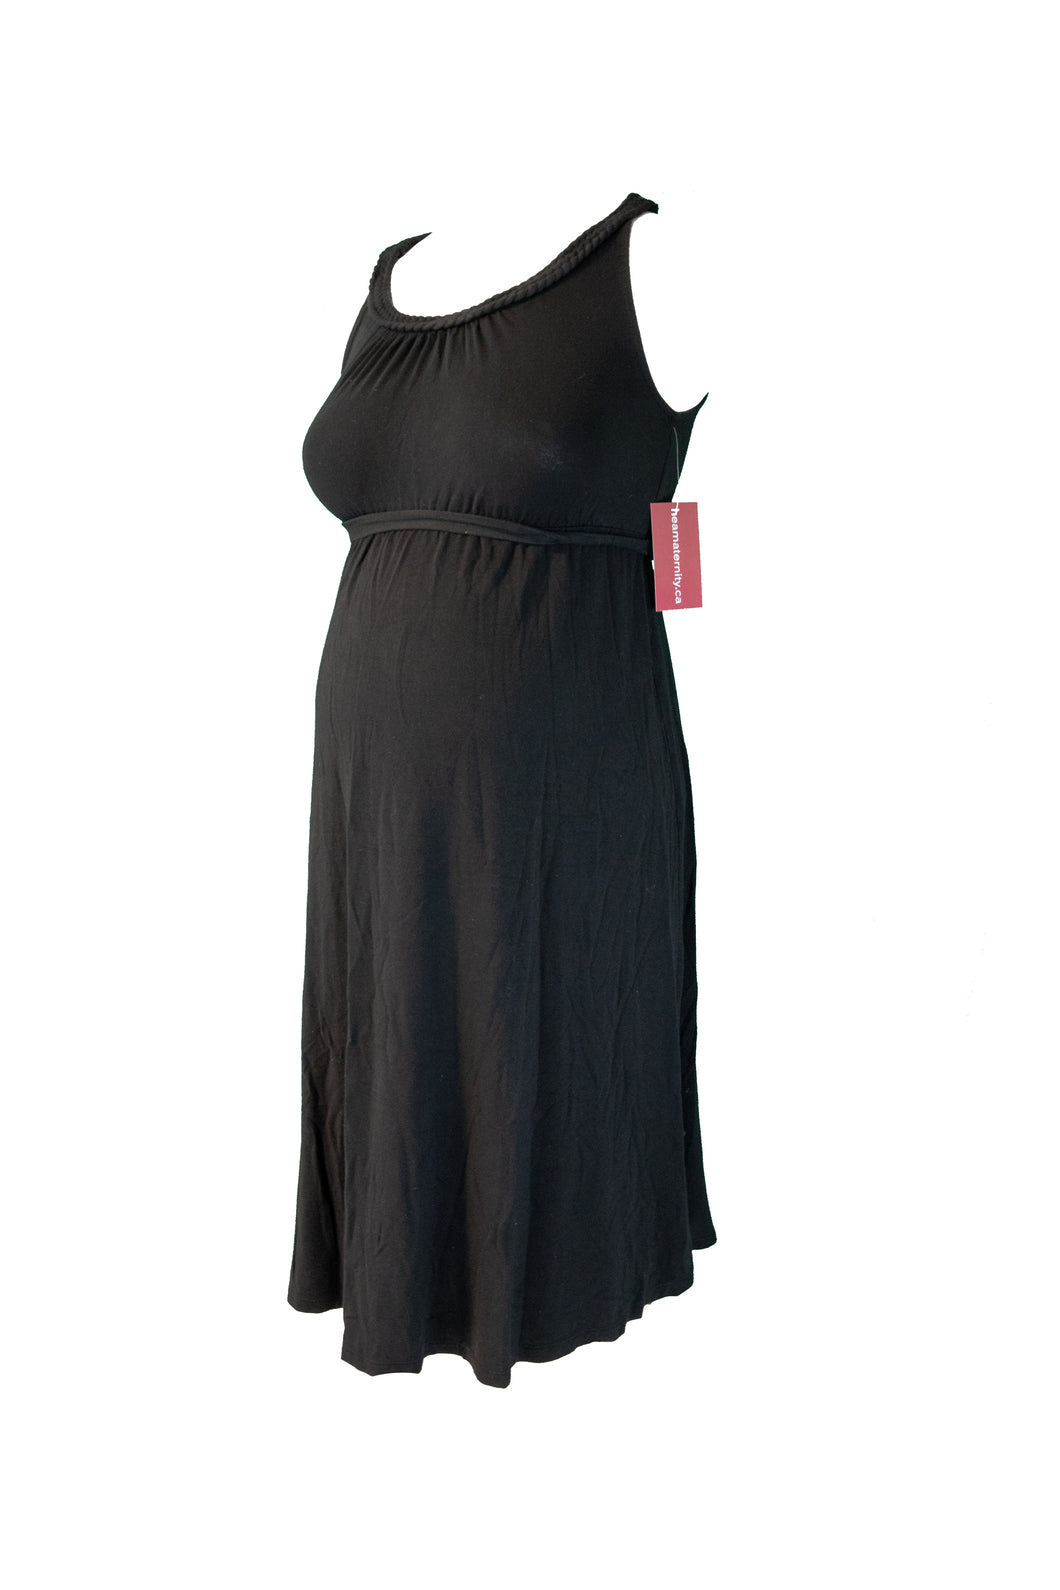 XS/S Liz Lang Little Black Maternity Dress with Braided Straps